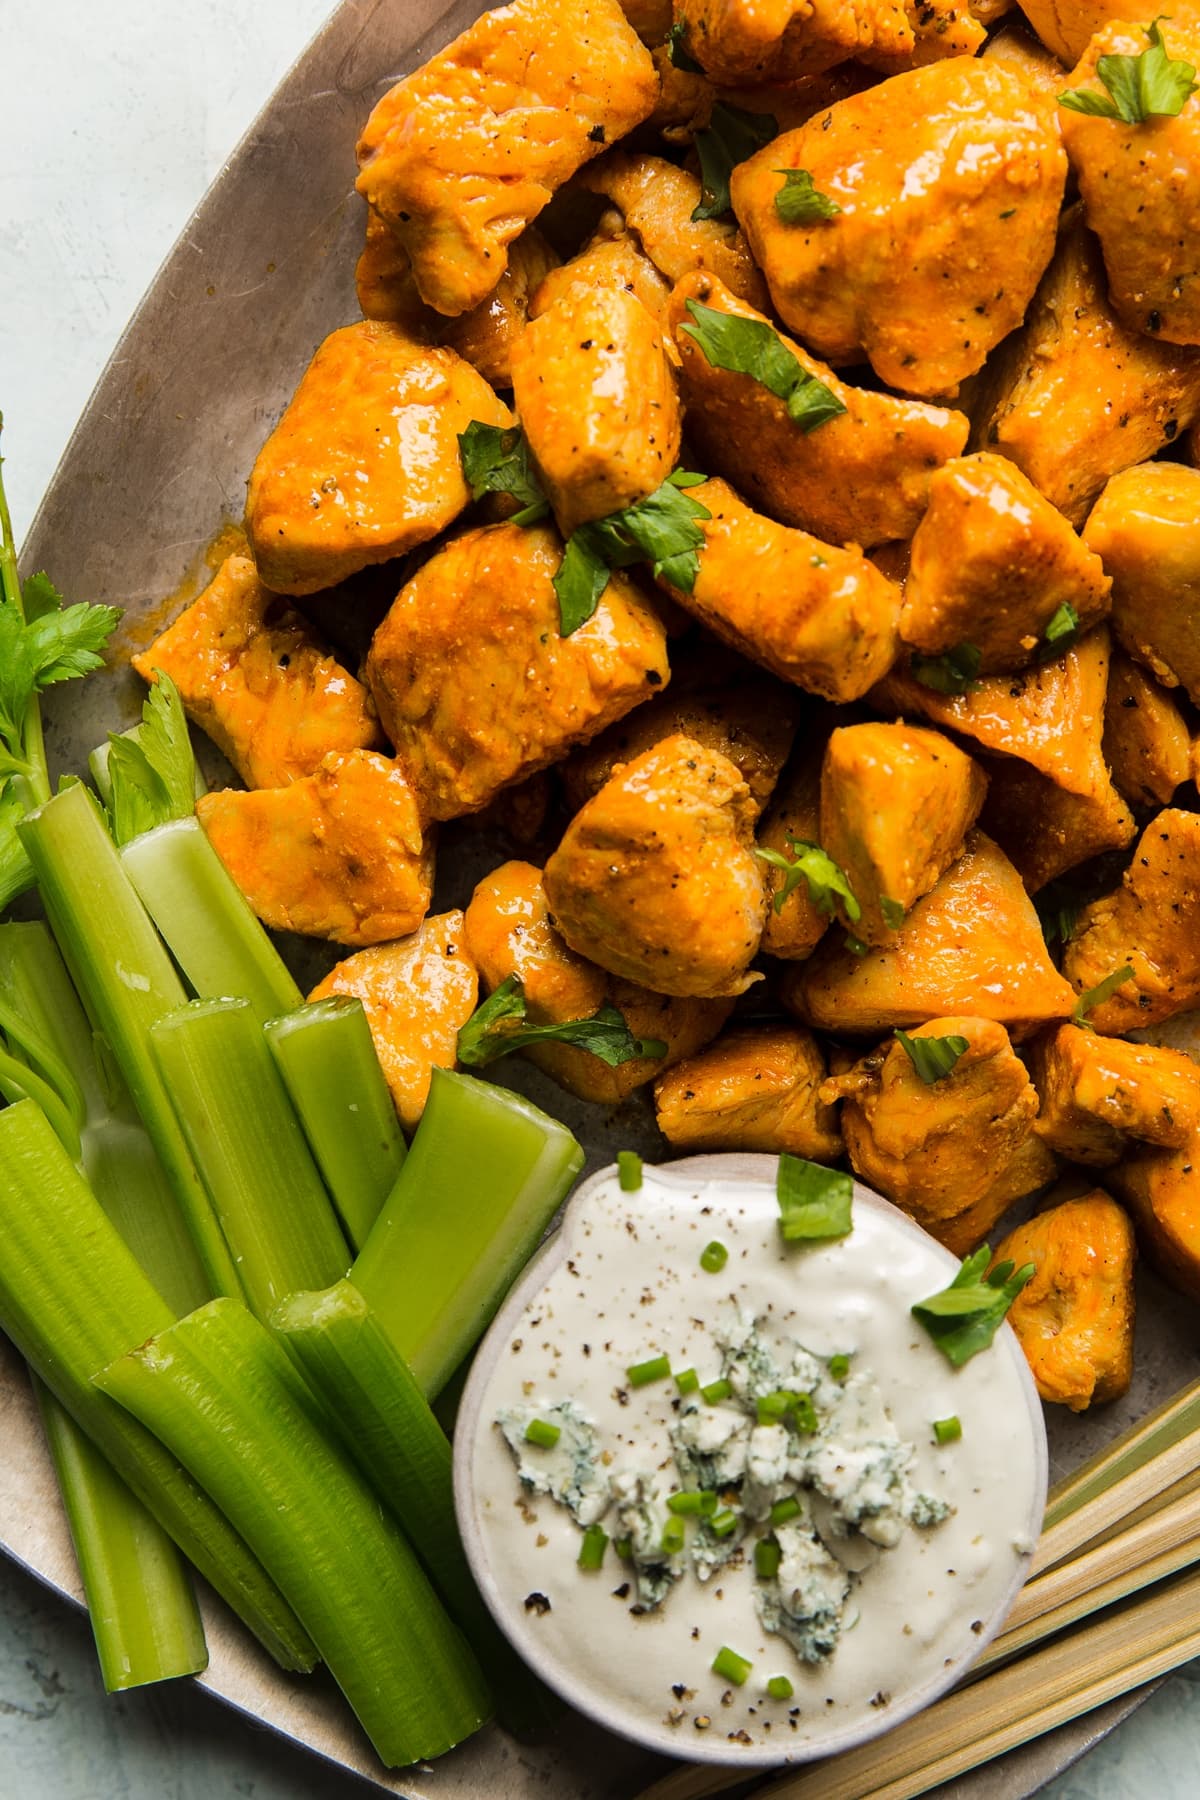 60 Best Breast Chicken | Buffalo Chicken Bites with Blue Cheese Dressings #9